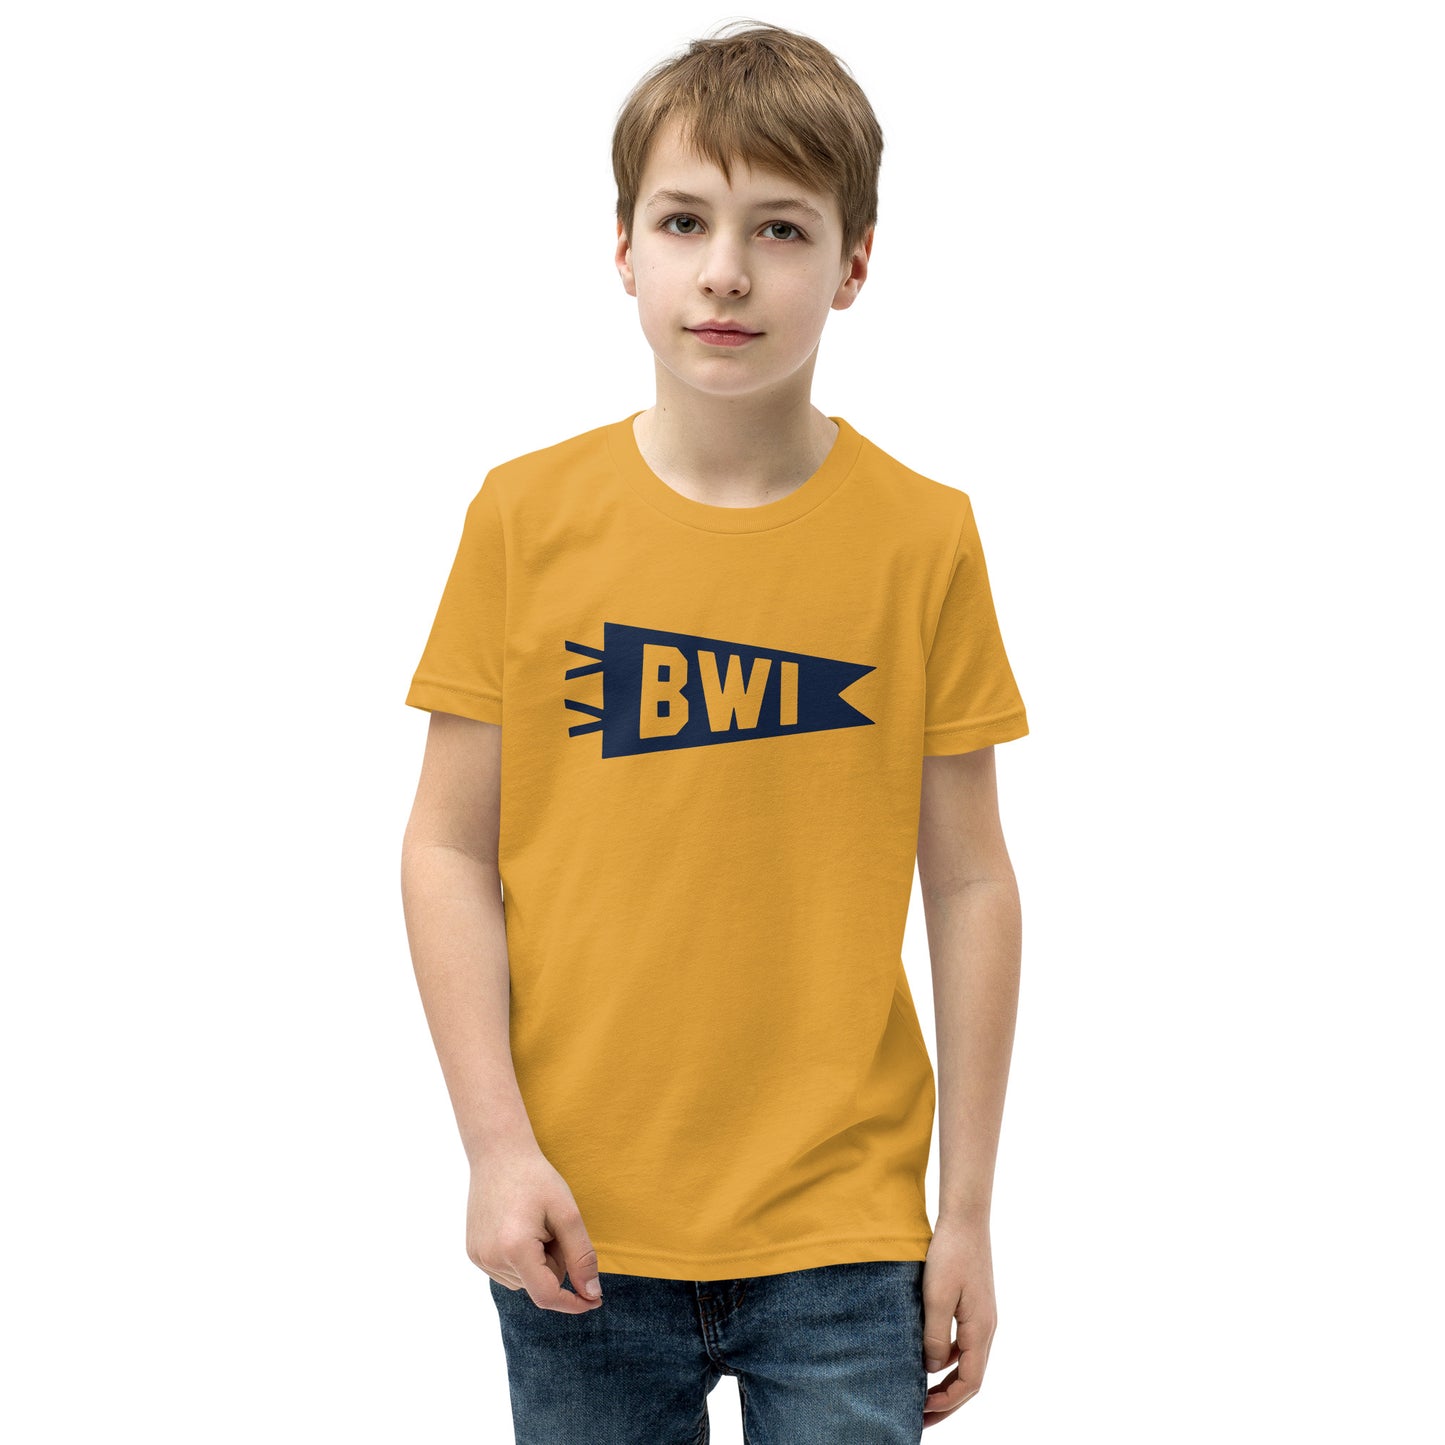 Kid's Airport Code Tee - Navy Blue Graphic • BWI Baltimore • YHM Designs - Image 08